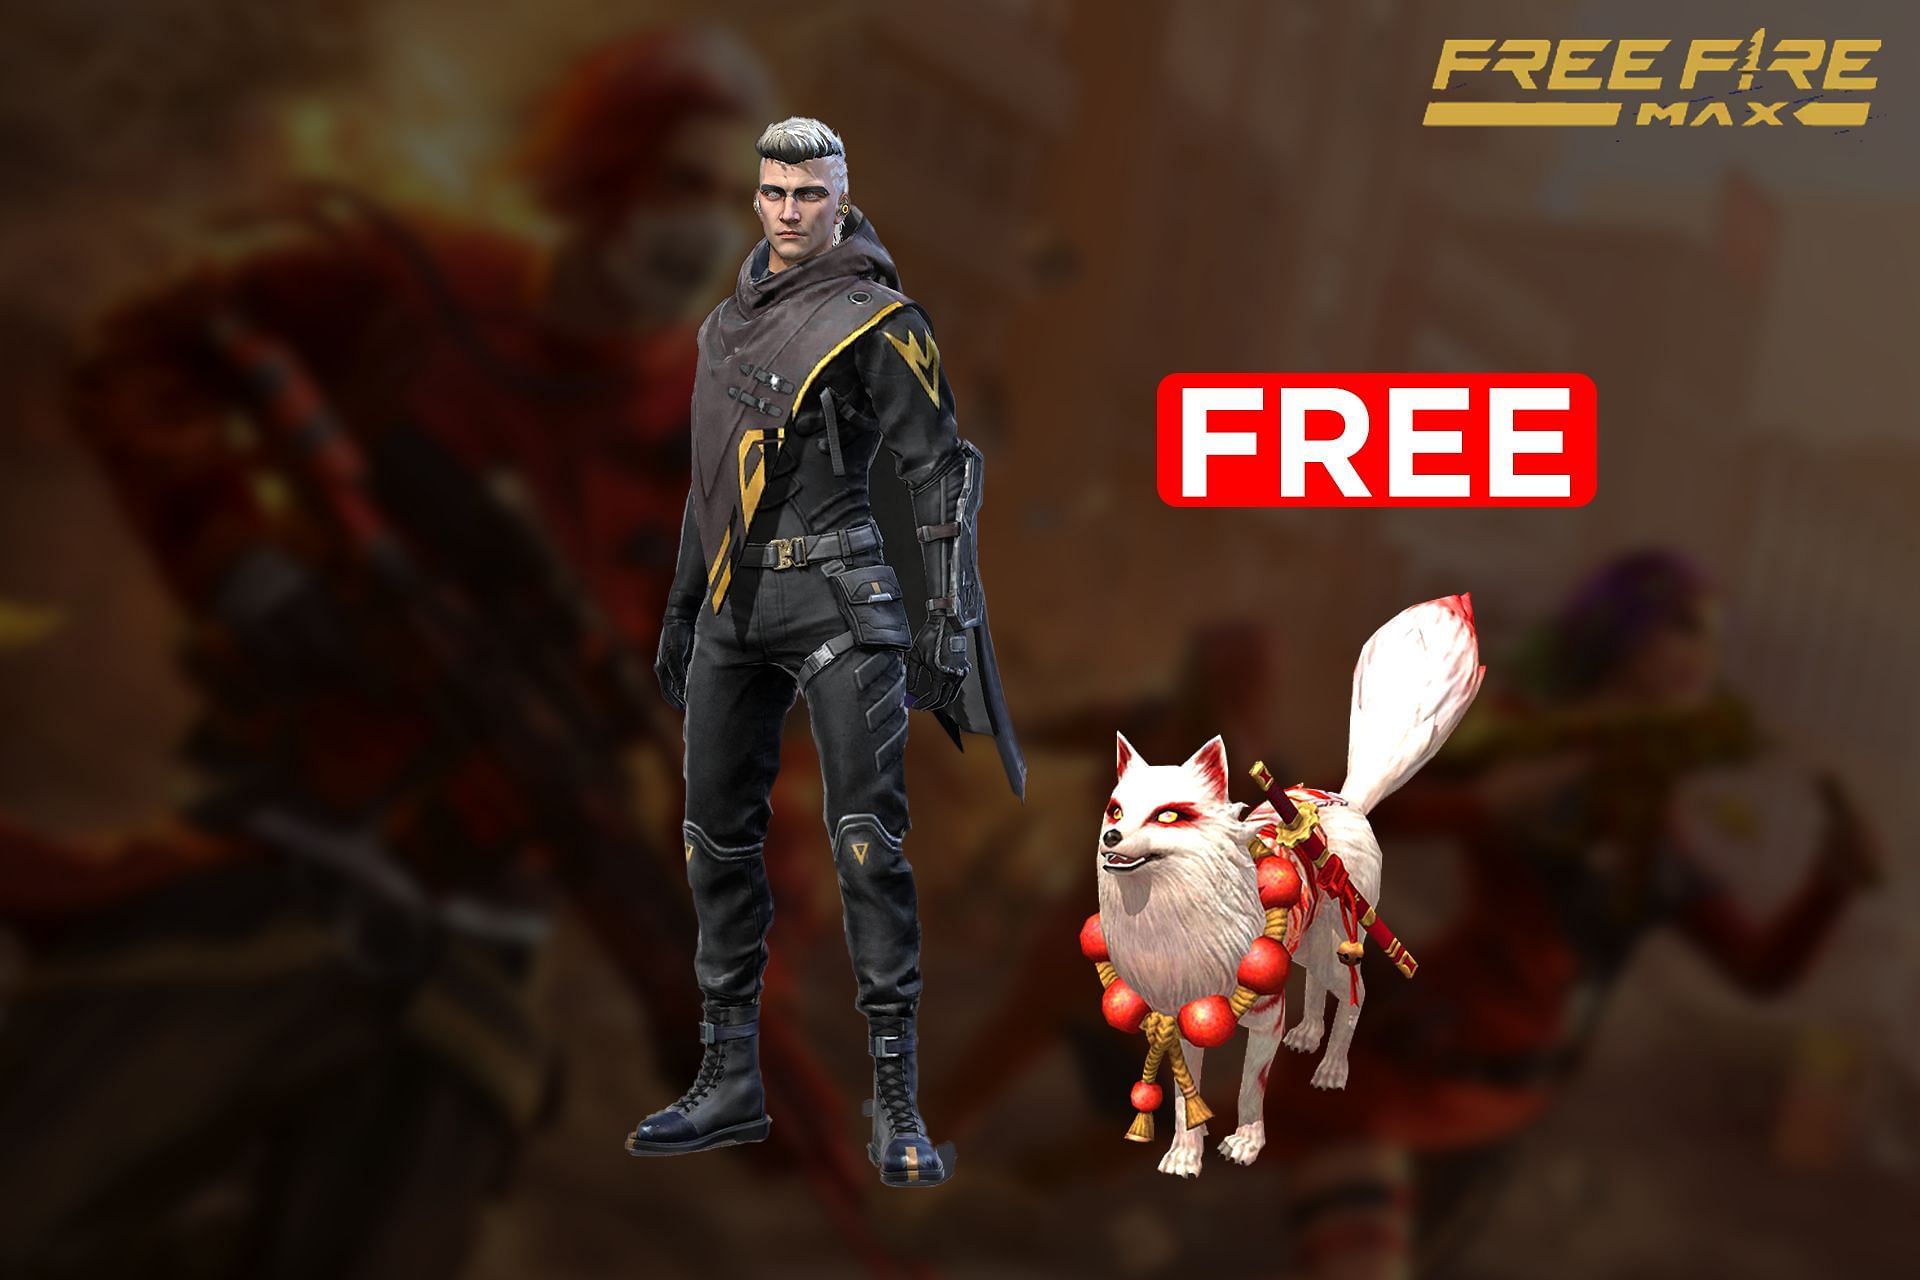 The new event offers multiple free rewards to players within the game (Image via Sportskeeda)